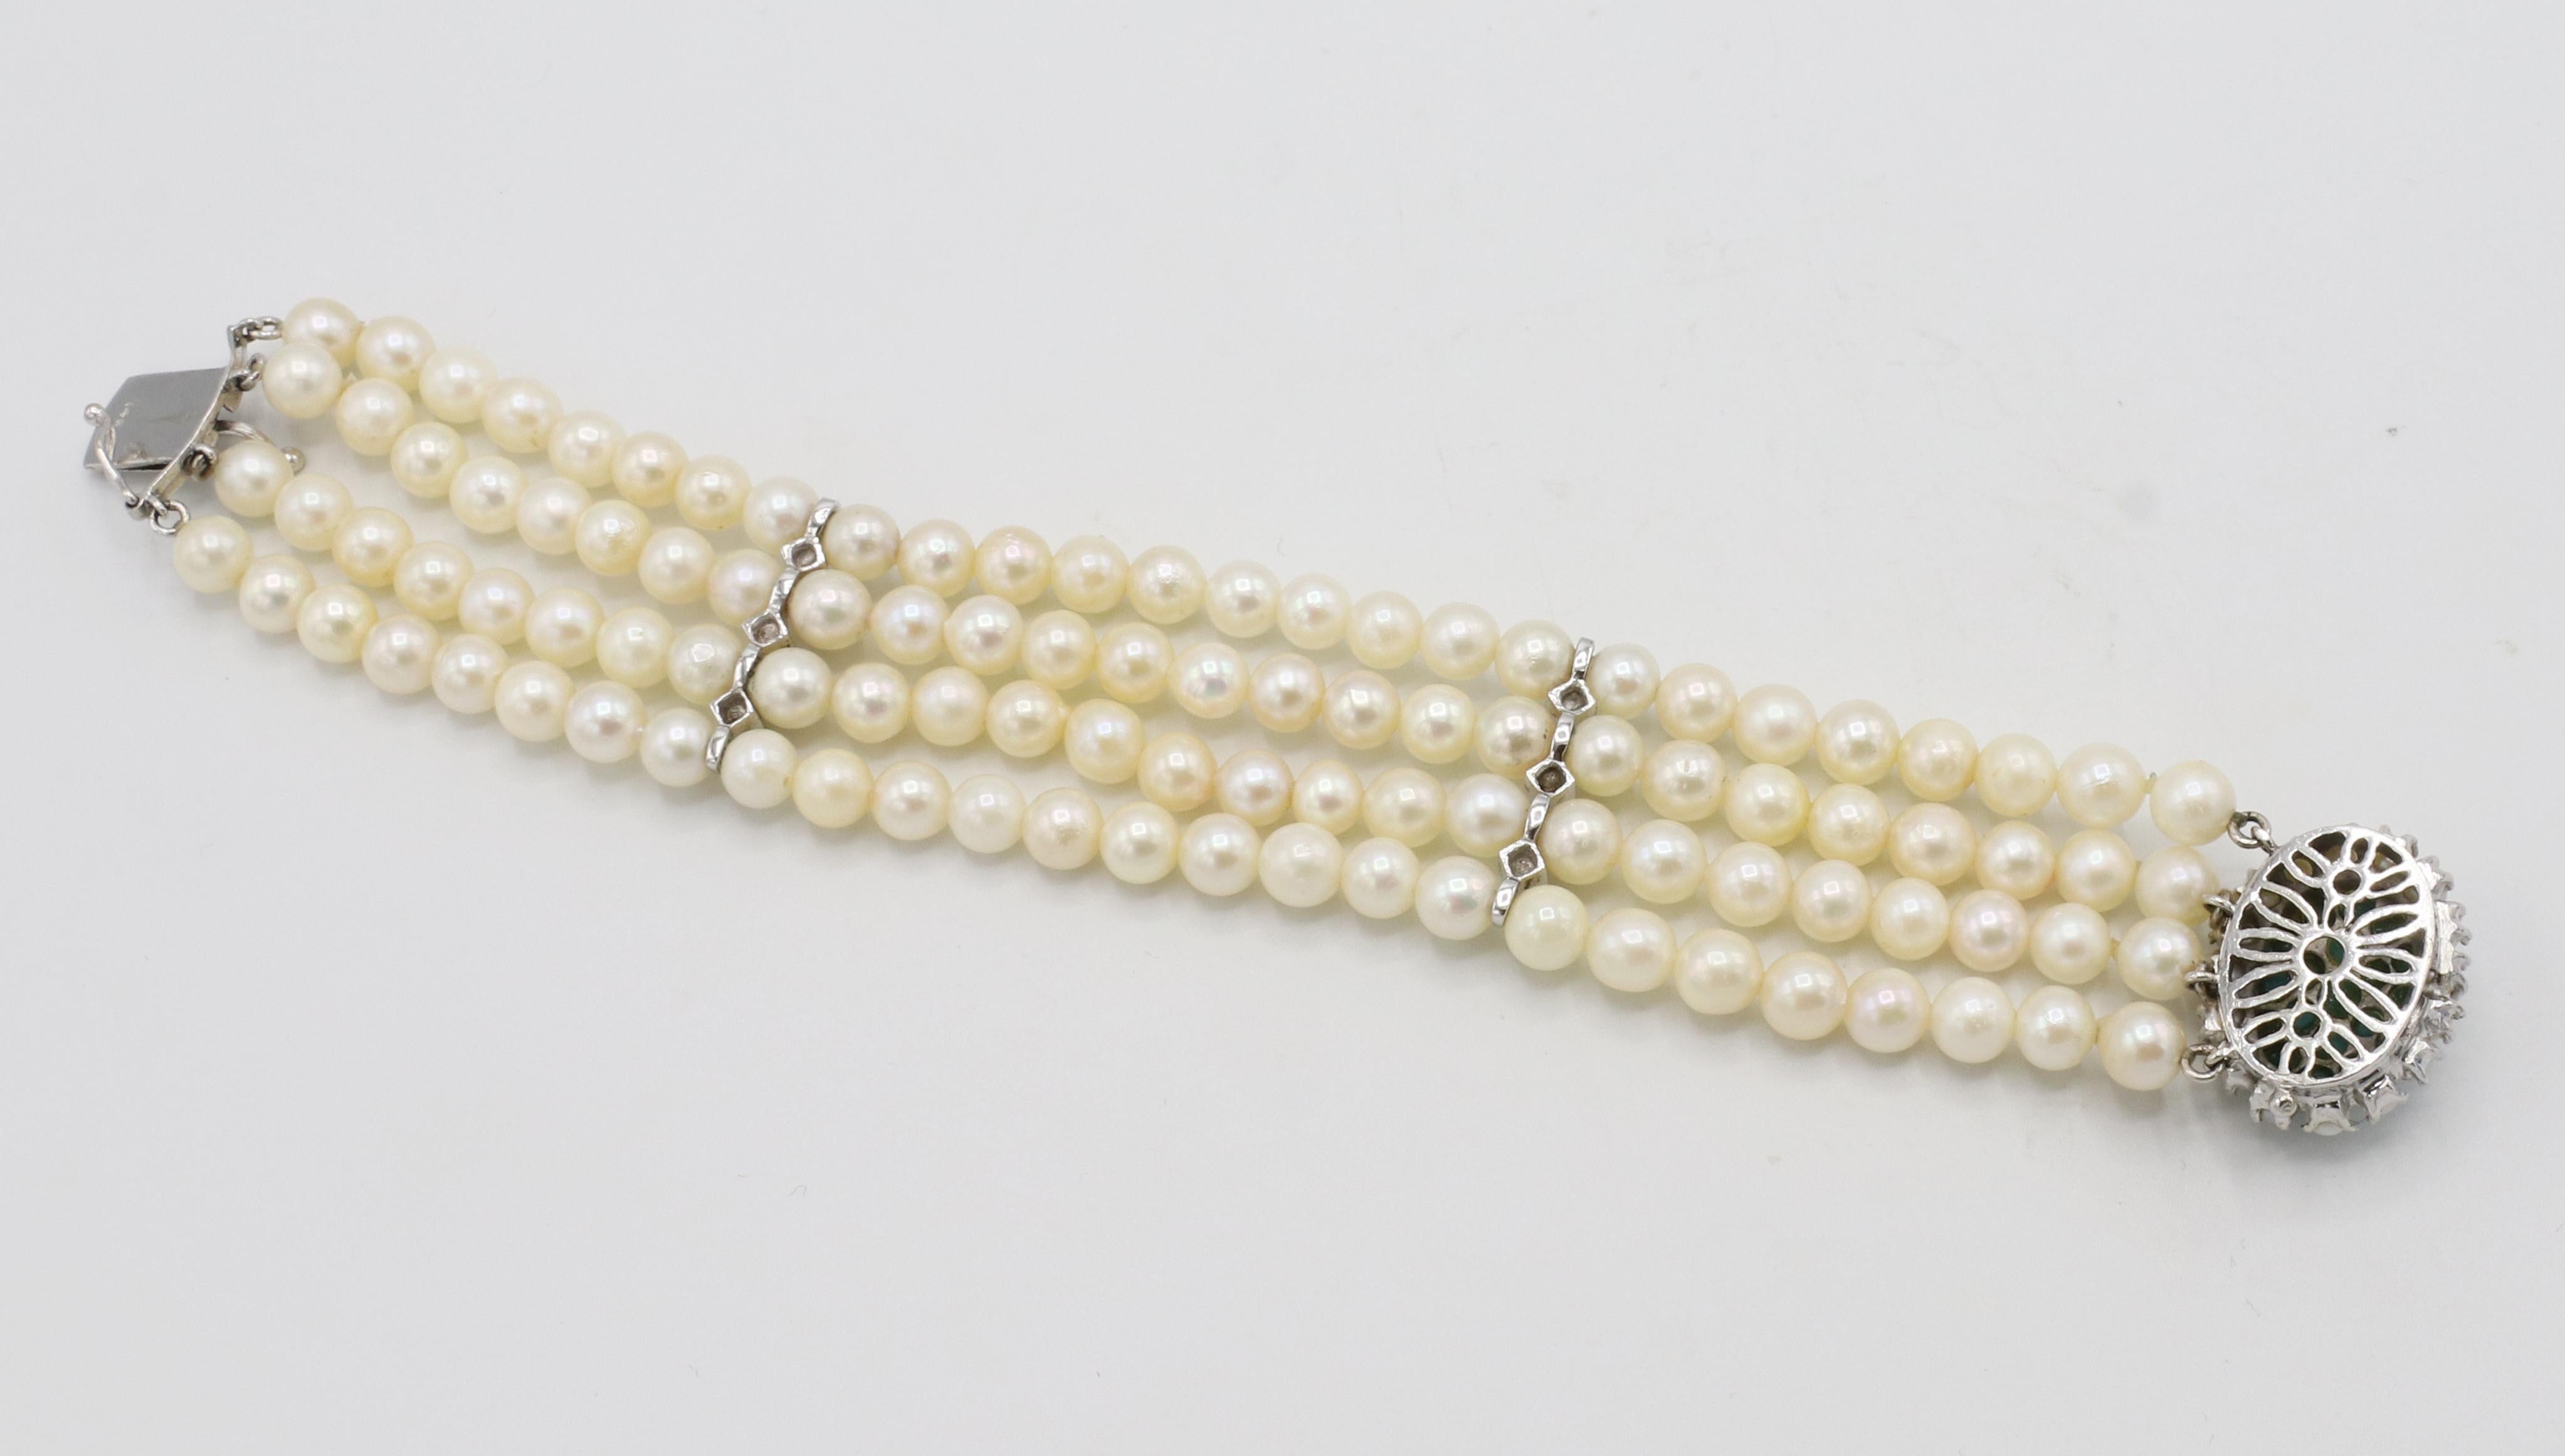 Retro 14 Karat White Gold 4-Row Pearl Bracelet With Turquoise Stations & Clasp For Sale